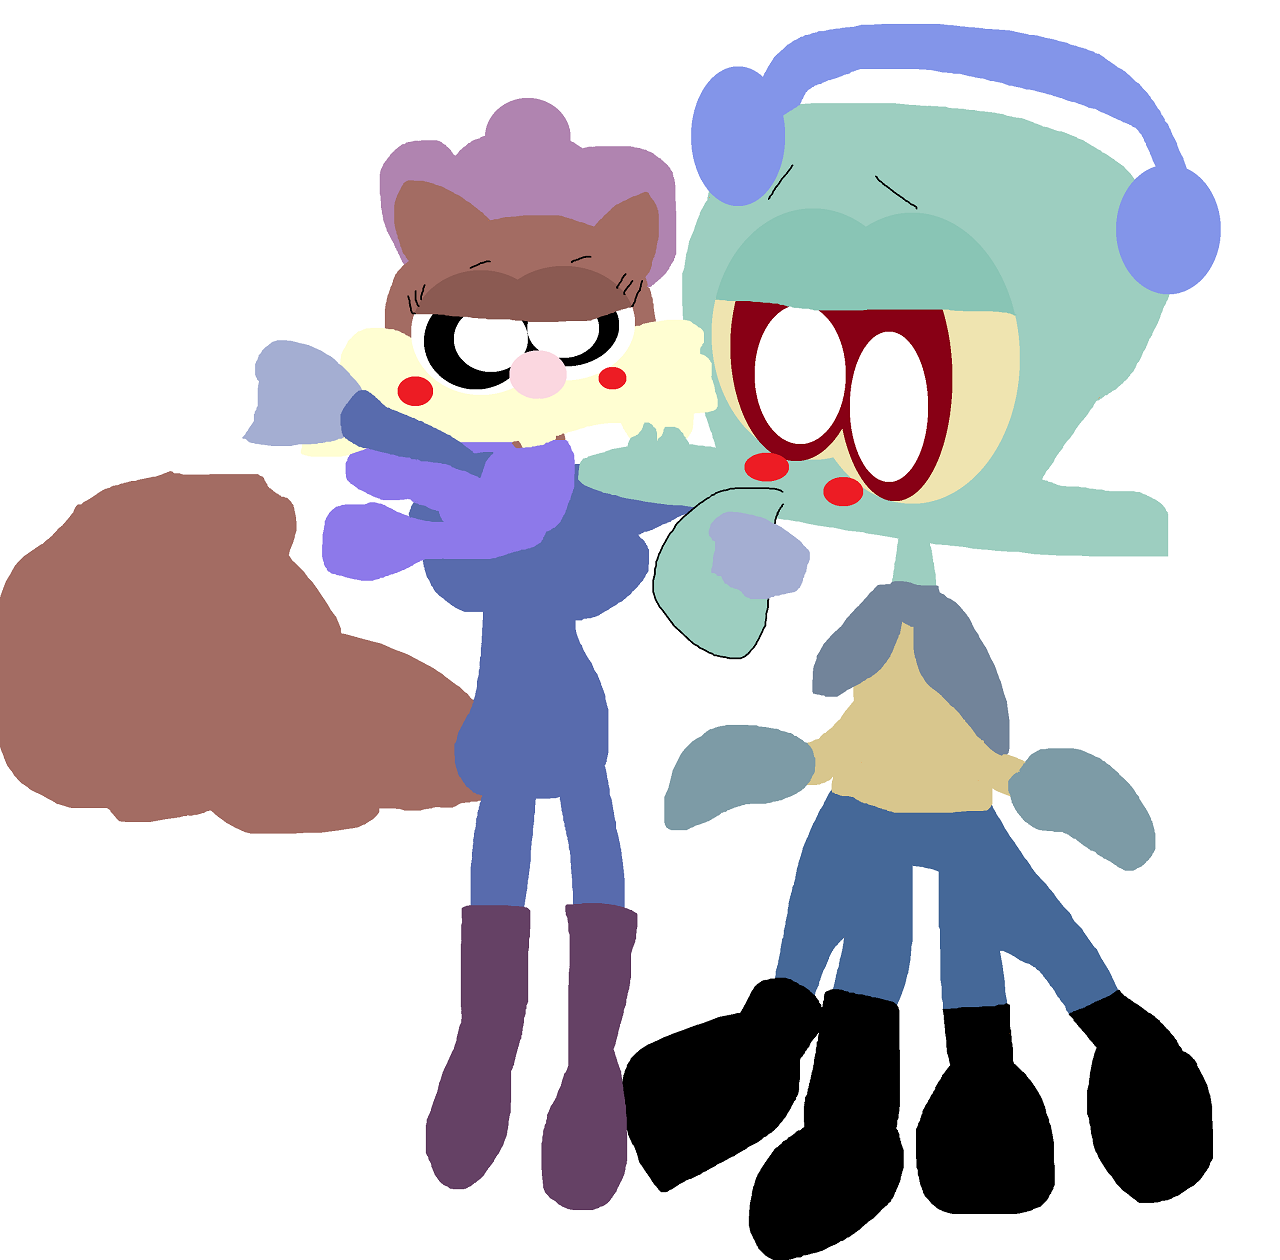 Sandy And Squidward In Winter Clothes Alt by Falconlobo